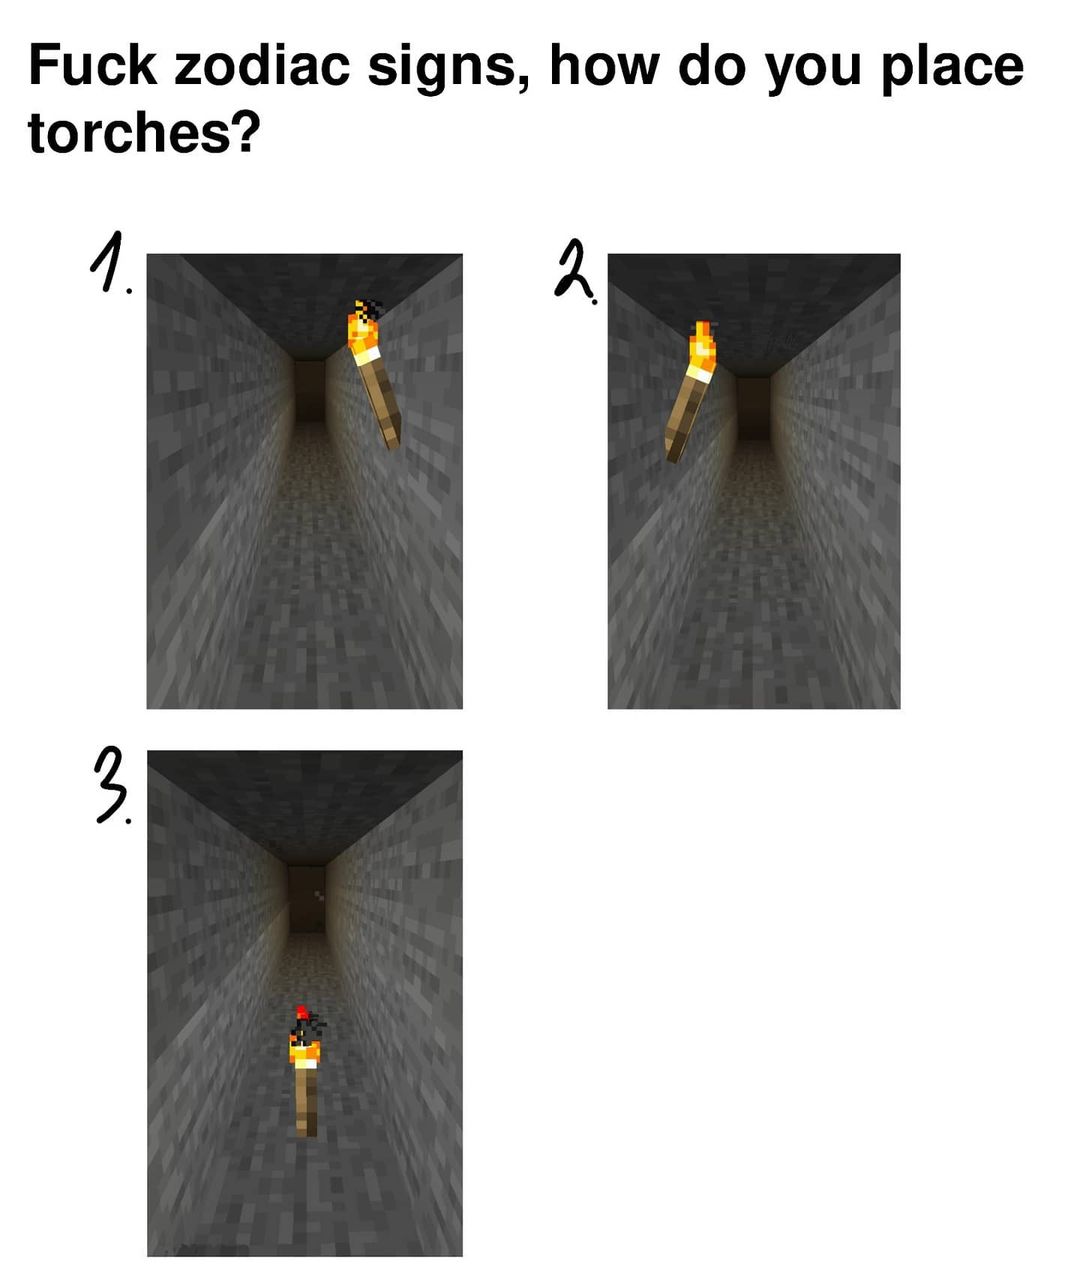 Fuck zodiac signs, how do you place torches?